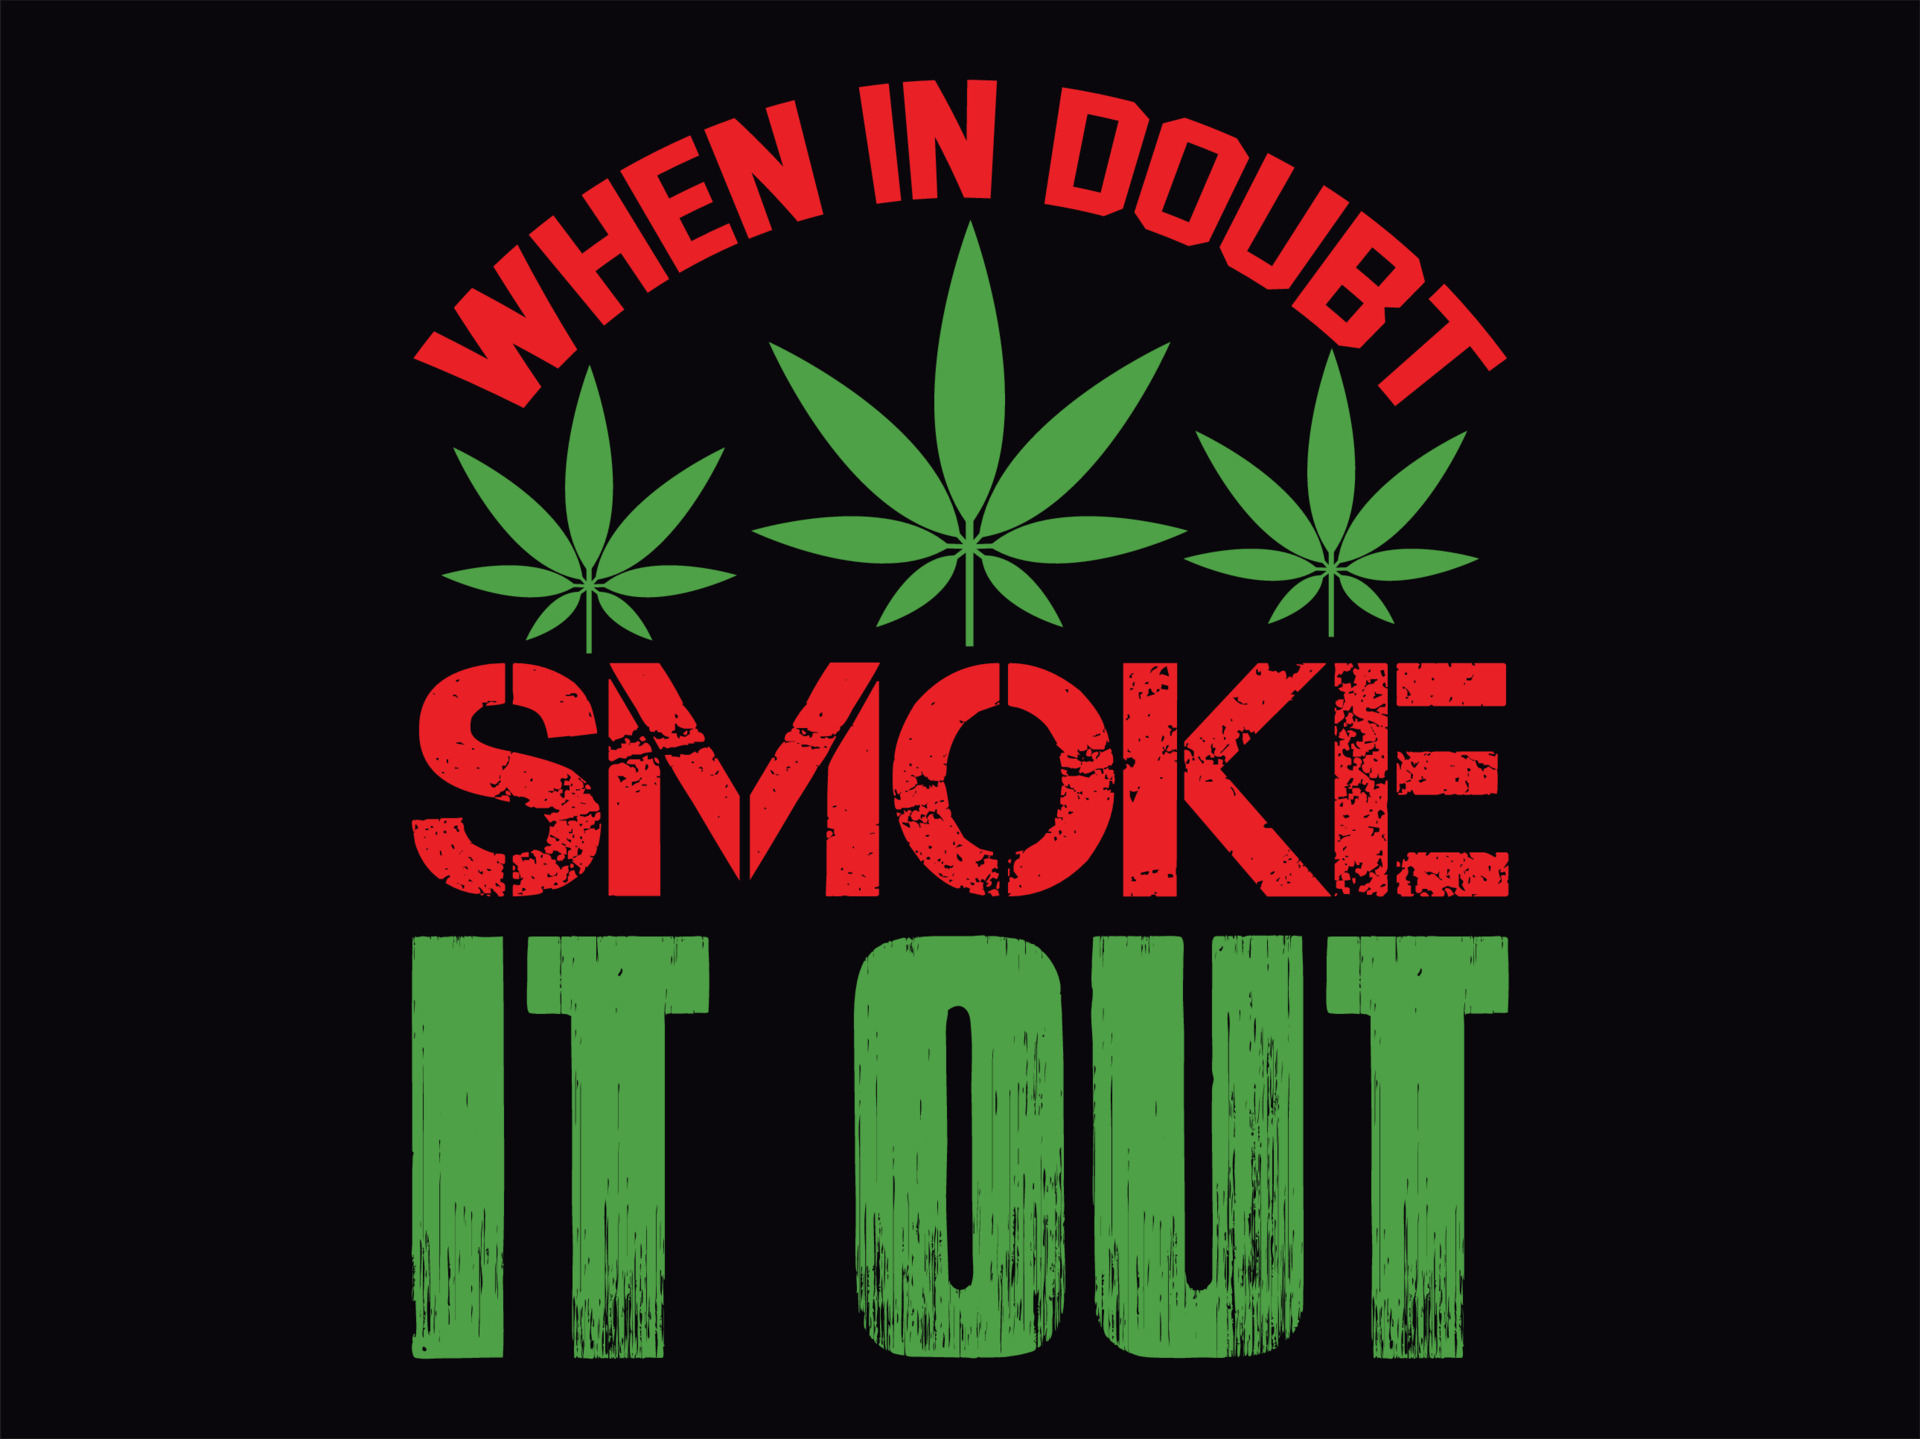 When In Doubt, Smoke It Out. T-Shirts